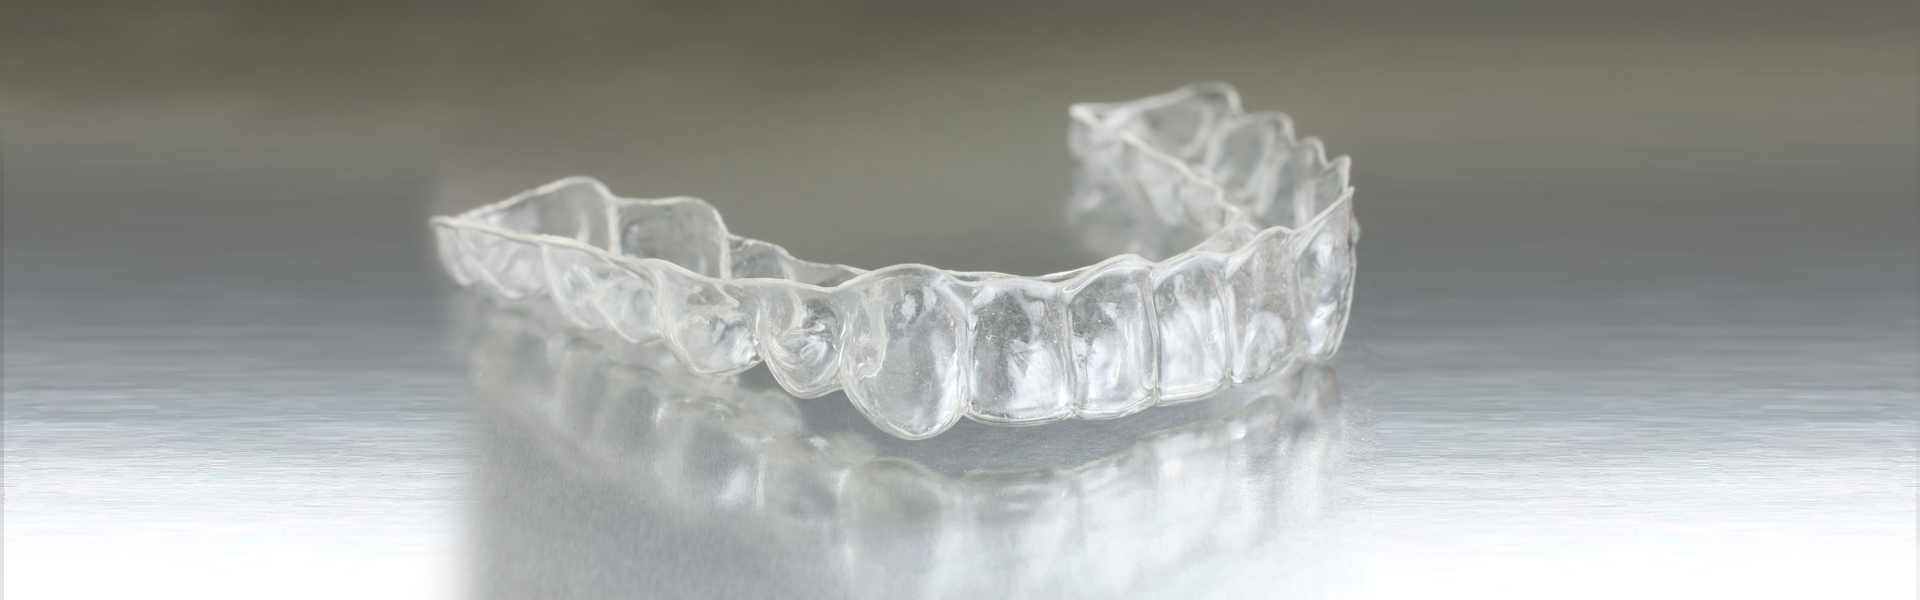 Invisible Braces – Find Out Now if ClearCorrect Aligners Will Work for You